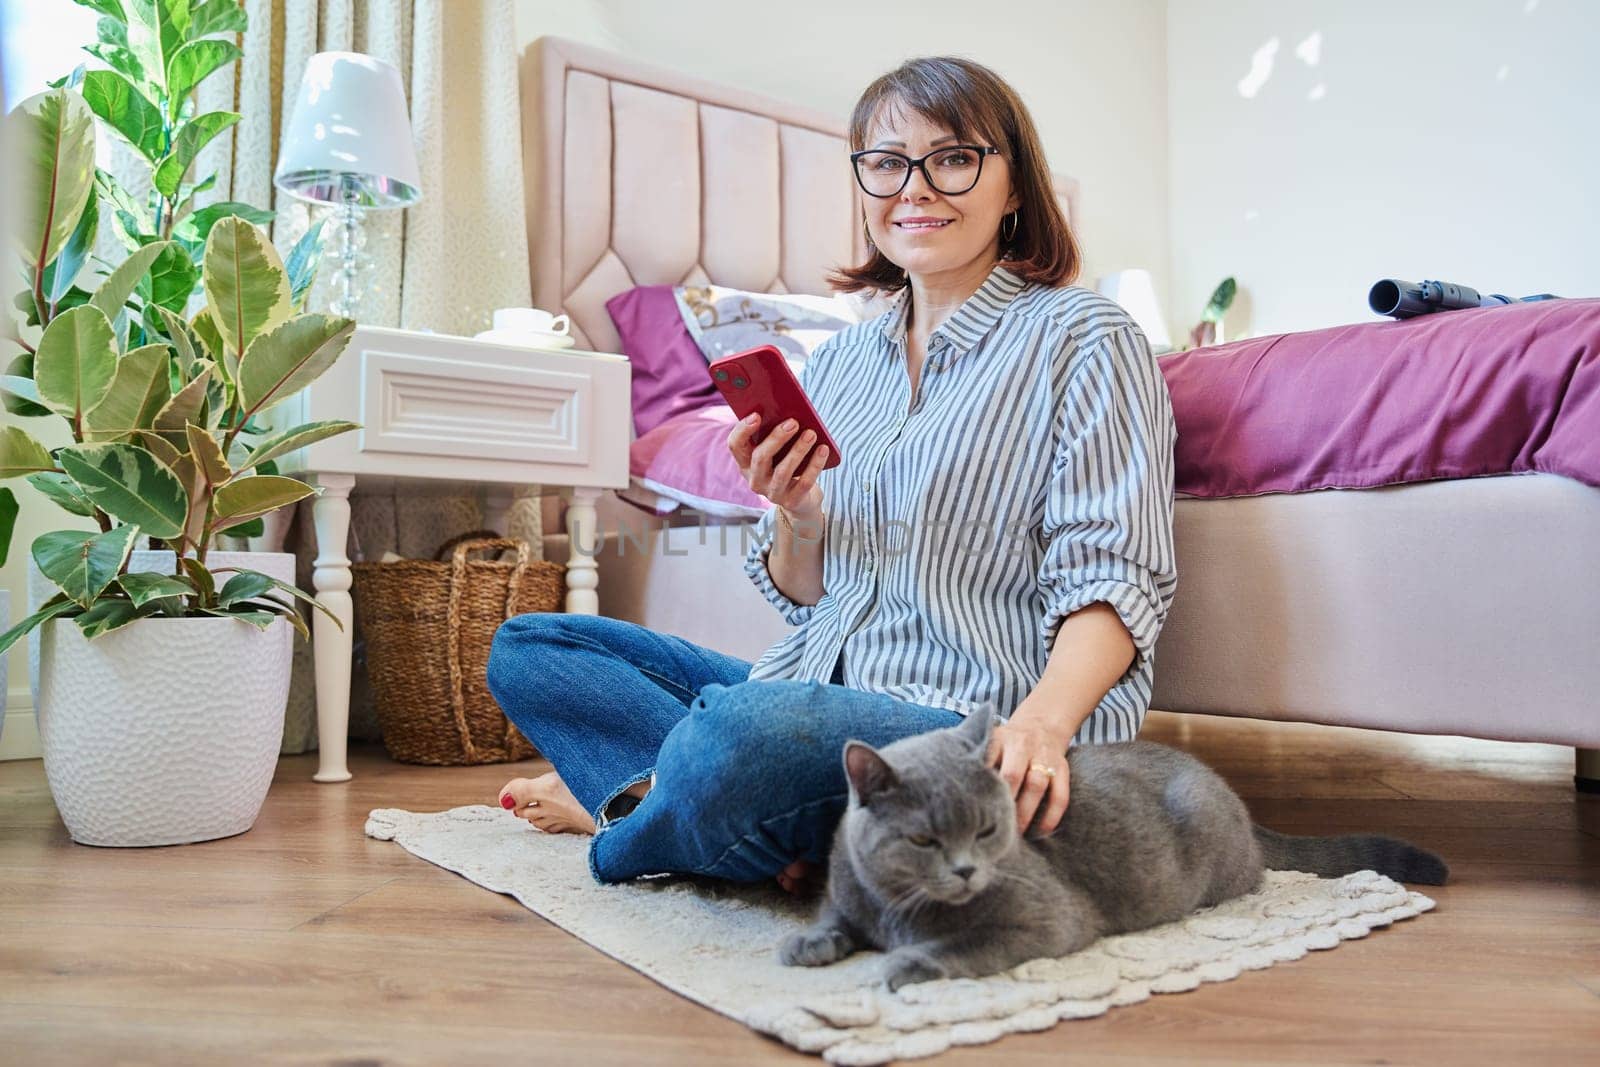 Home lifestyle, woman with cat, comfort calmness concept. Female sitting on floor on carpet using smartphone, pet gray british cat lying near owner